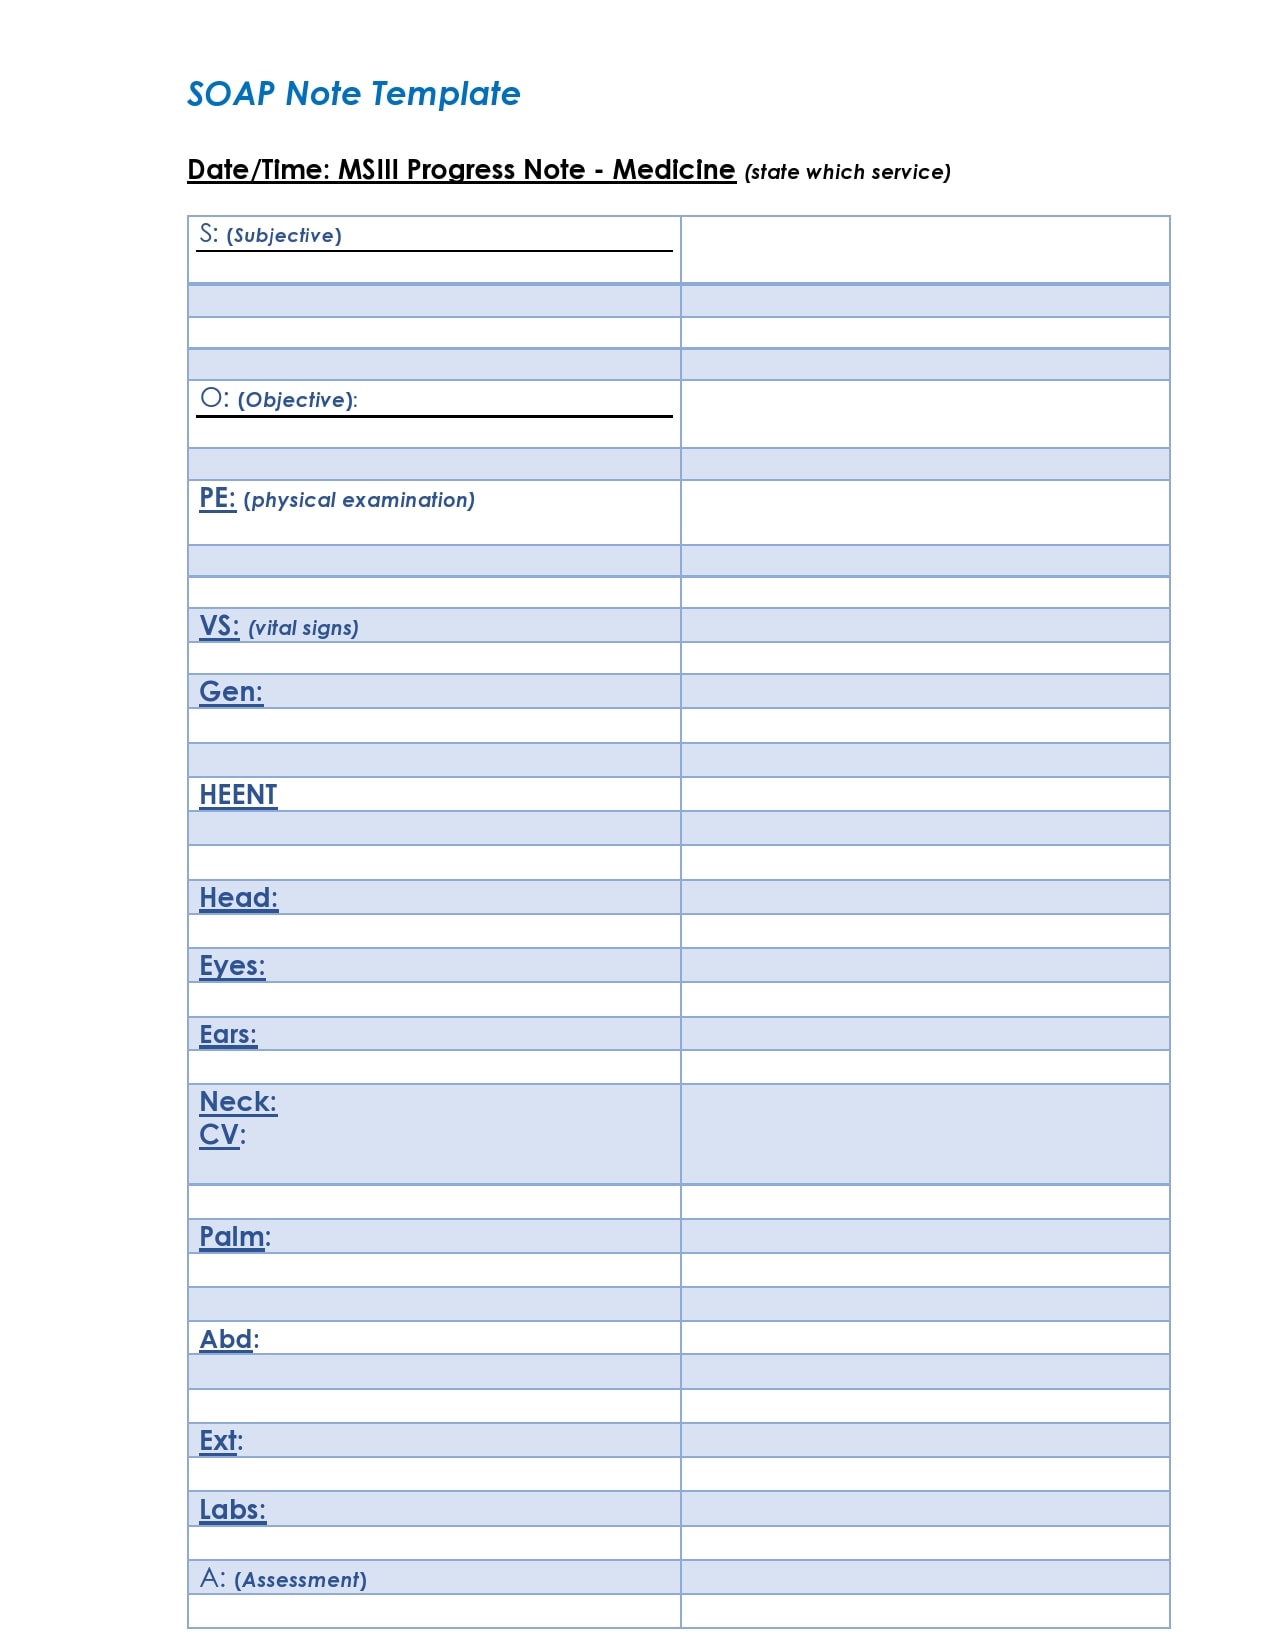 22 Blank SOAP Note Templates (+Examples) - TemplateArchive Pertaining To Blank Soap Note Template